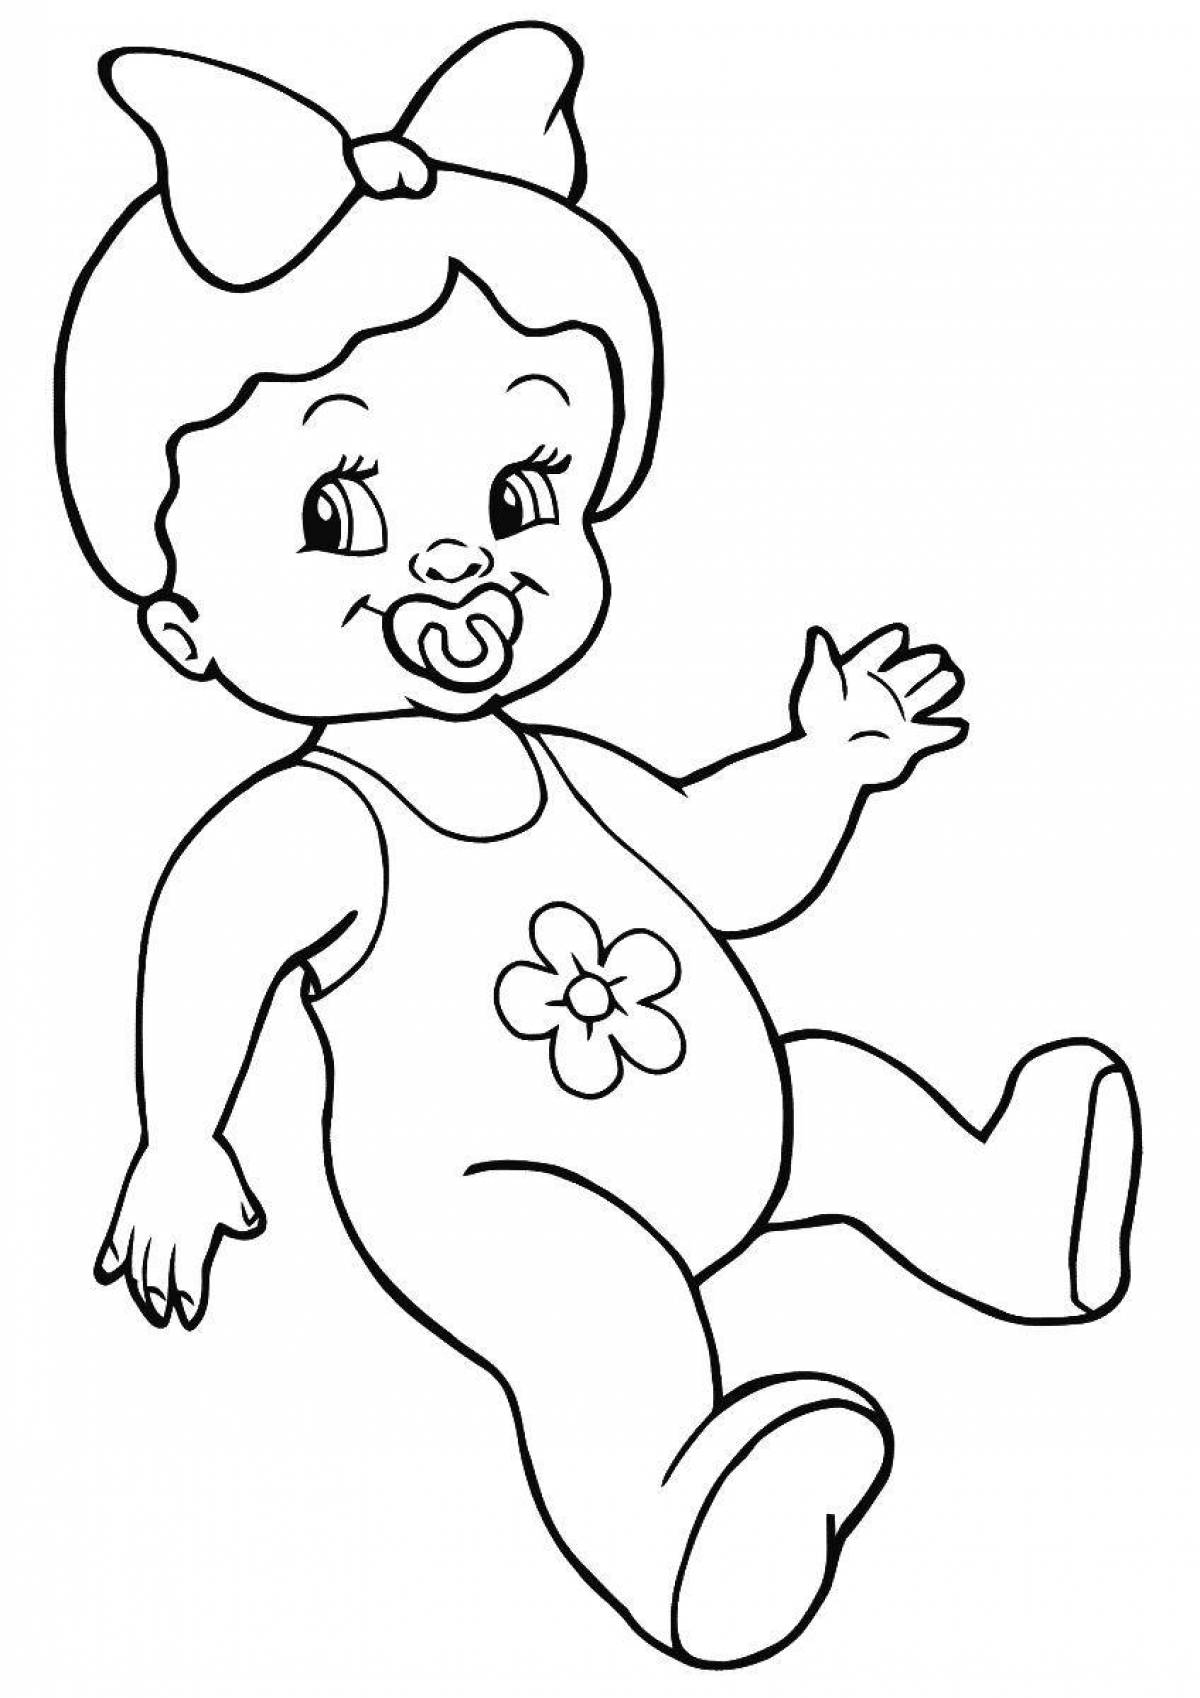 Coloring page blissful baby bon